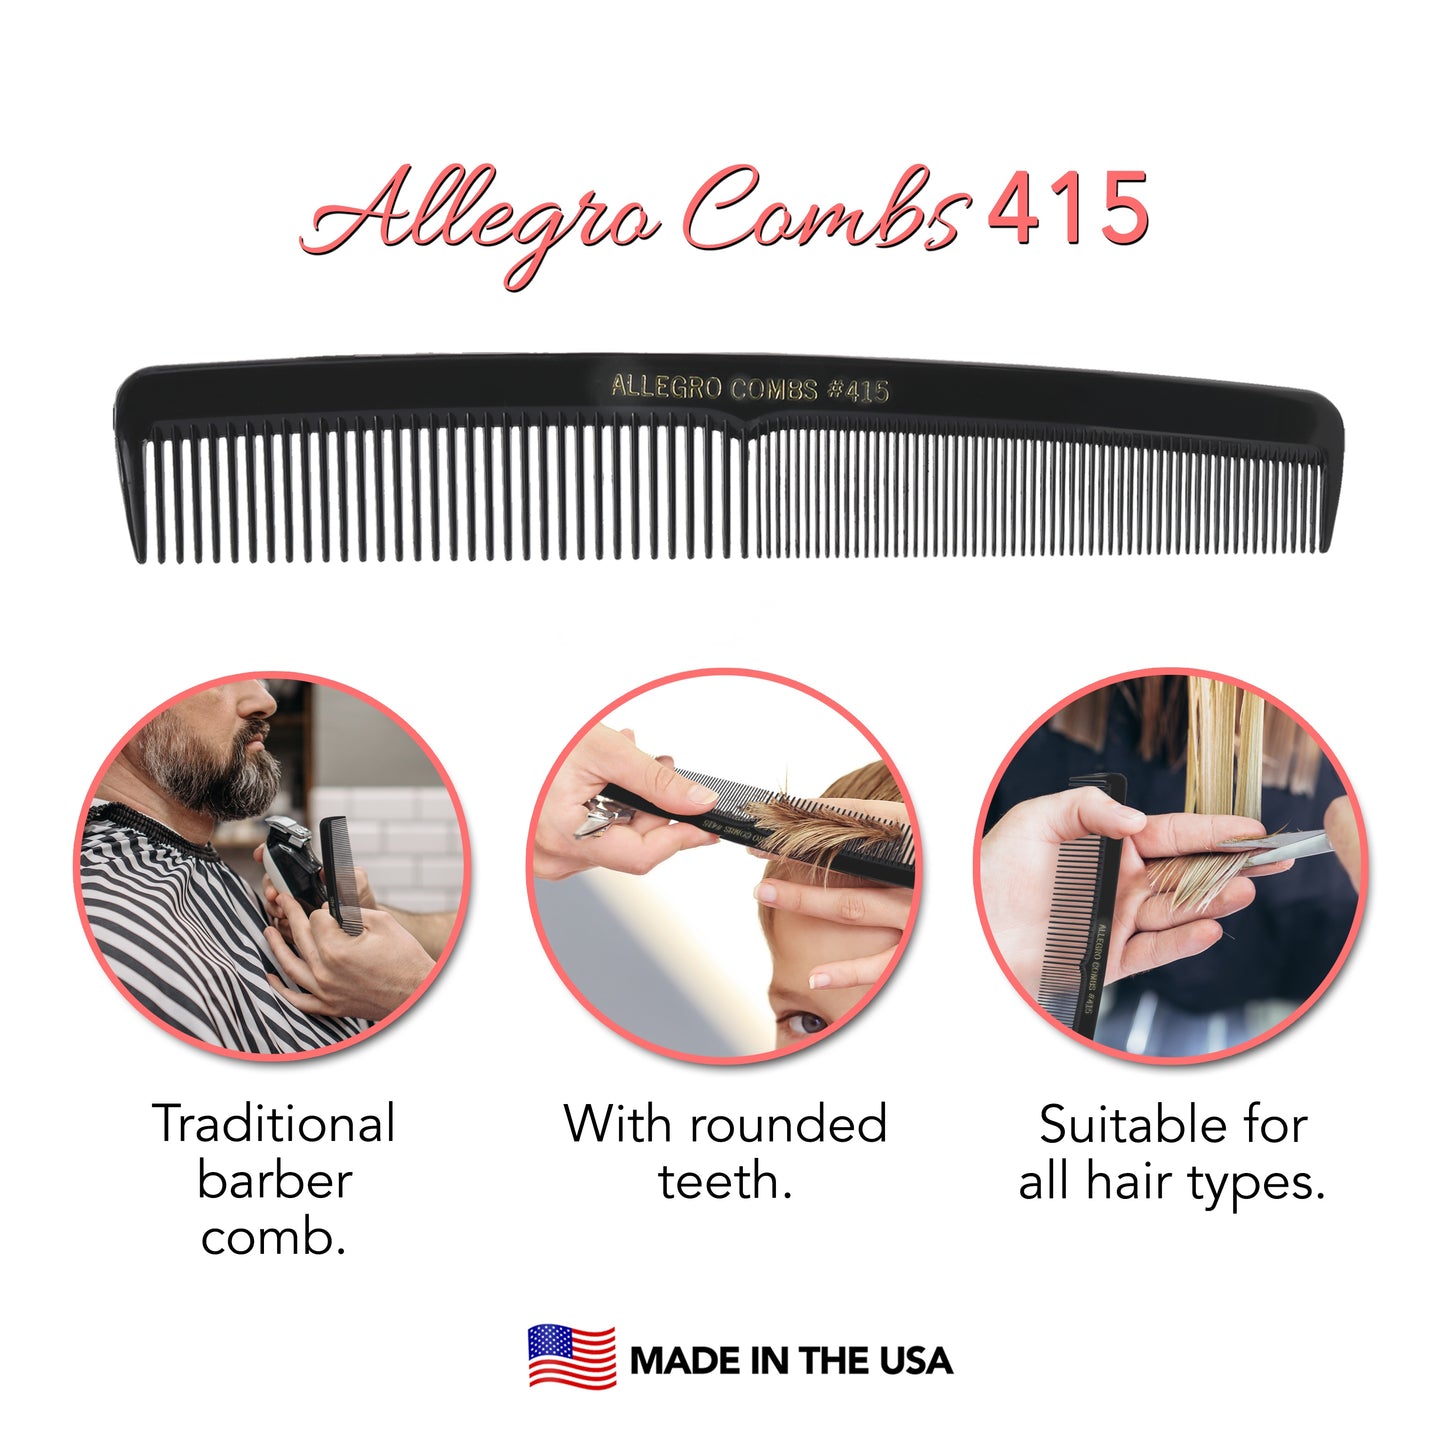 Allegro Combs 415 All Purpose Hair Combs Hair Styling combs Black Combs 12 Pcs.